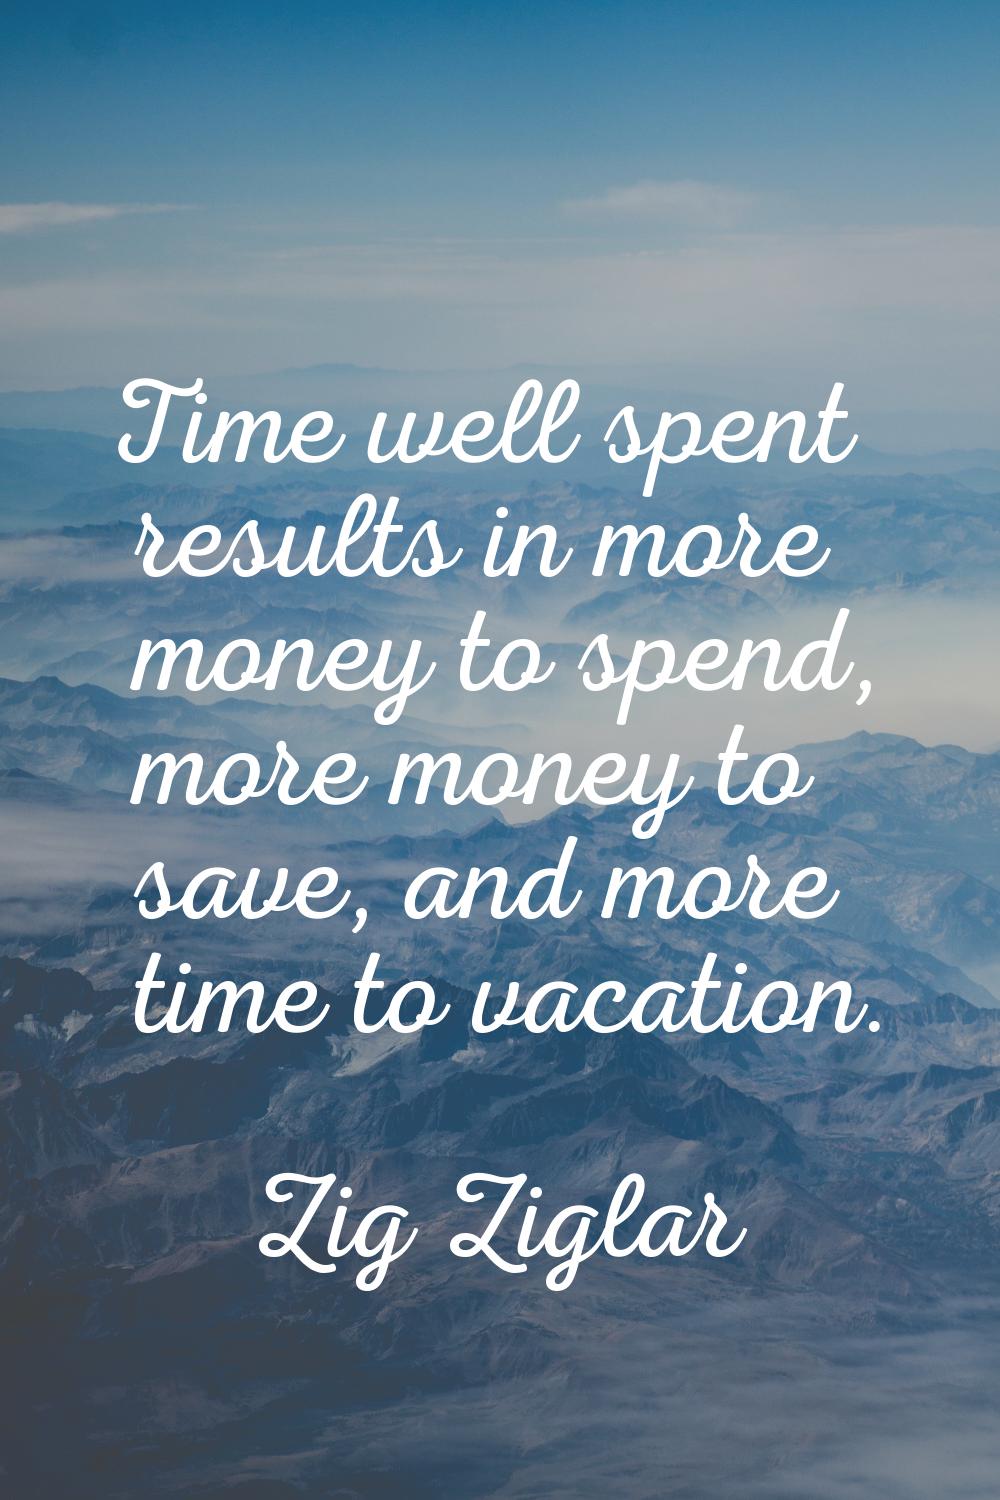 Time well spent results in more money to spend, more money to save, and more time to vacation.